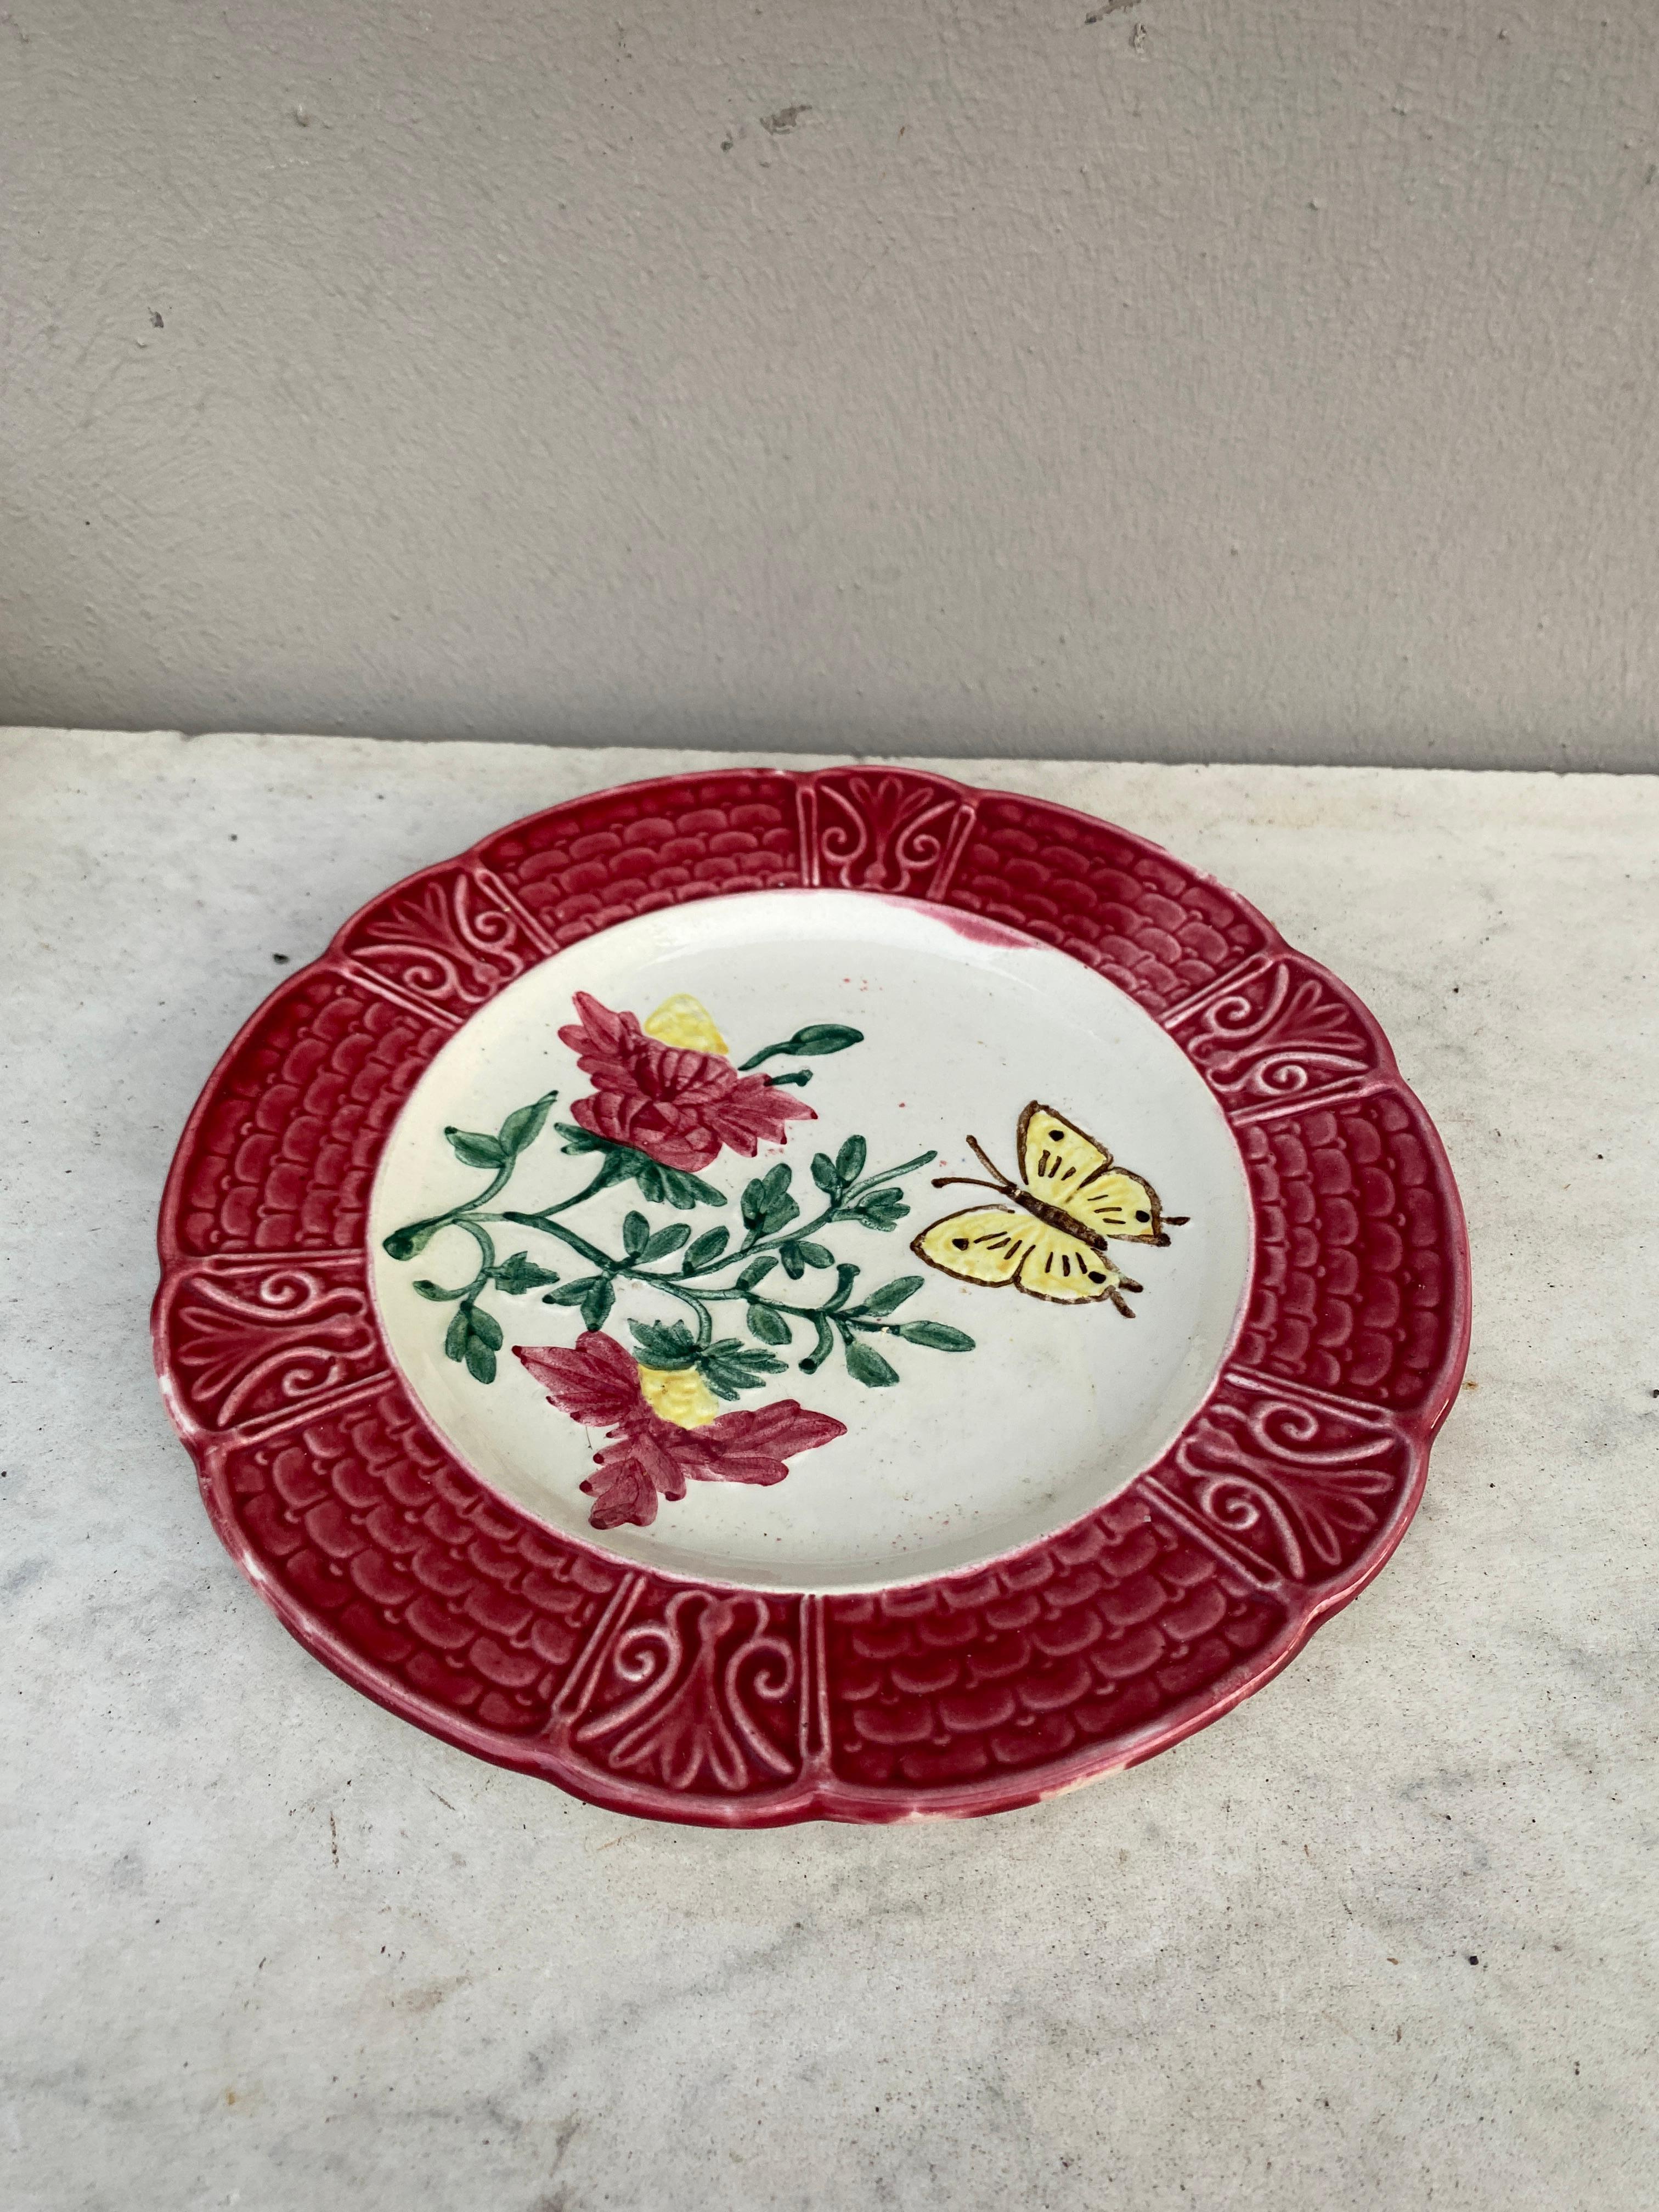 French majolica plate with flowers & butterfly, circa 1900.